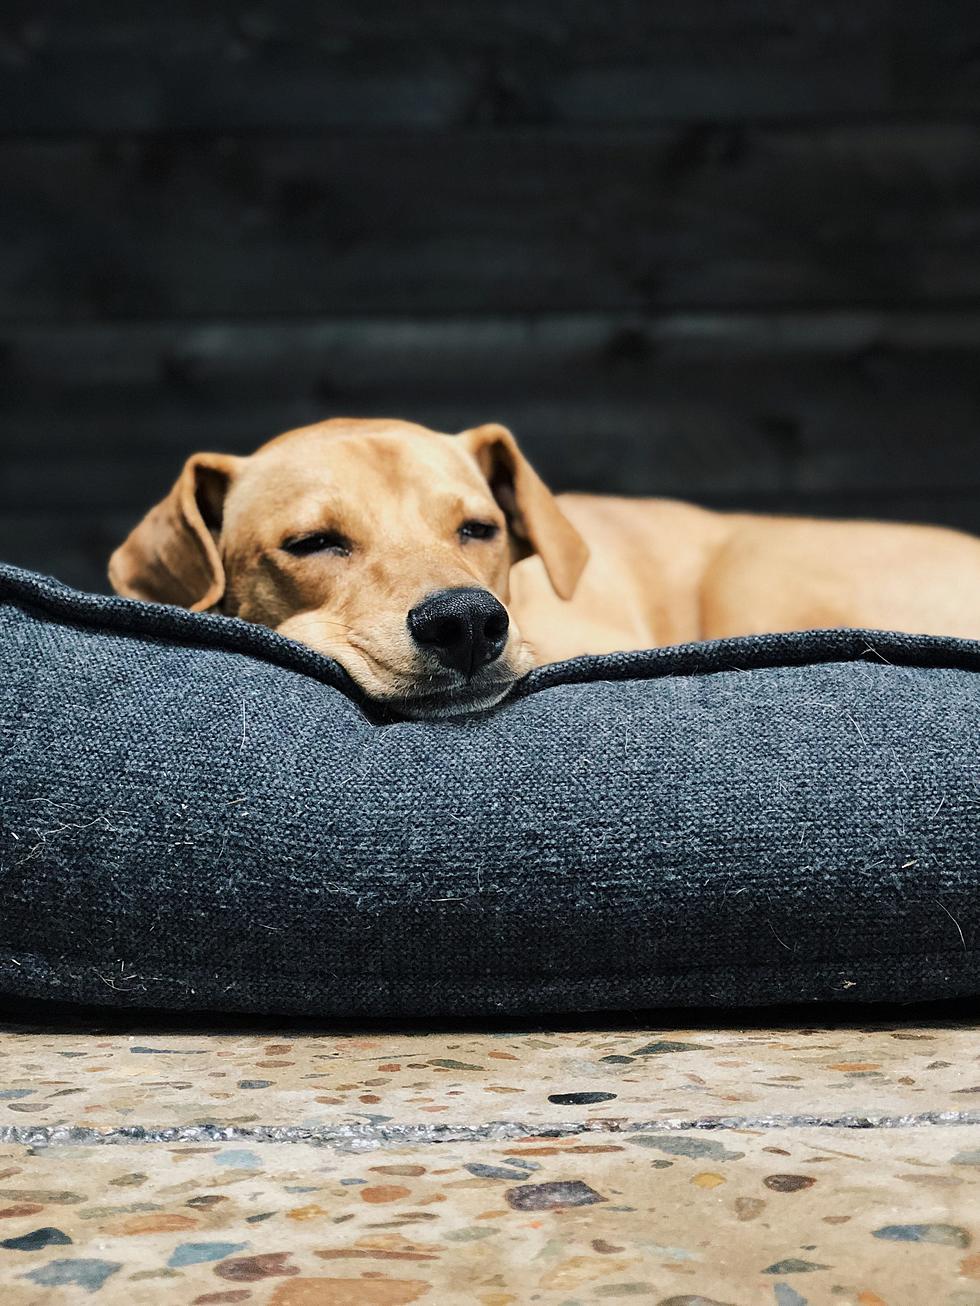 Dogs Make Dog Beds Look So Comfy!  How About One For Yourself?